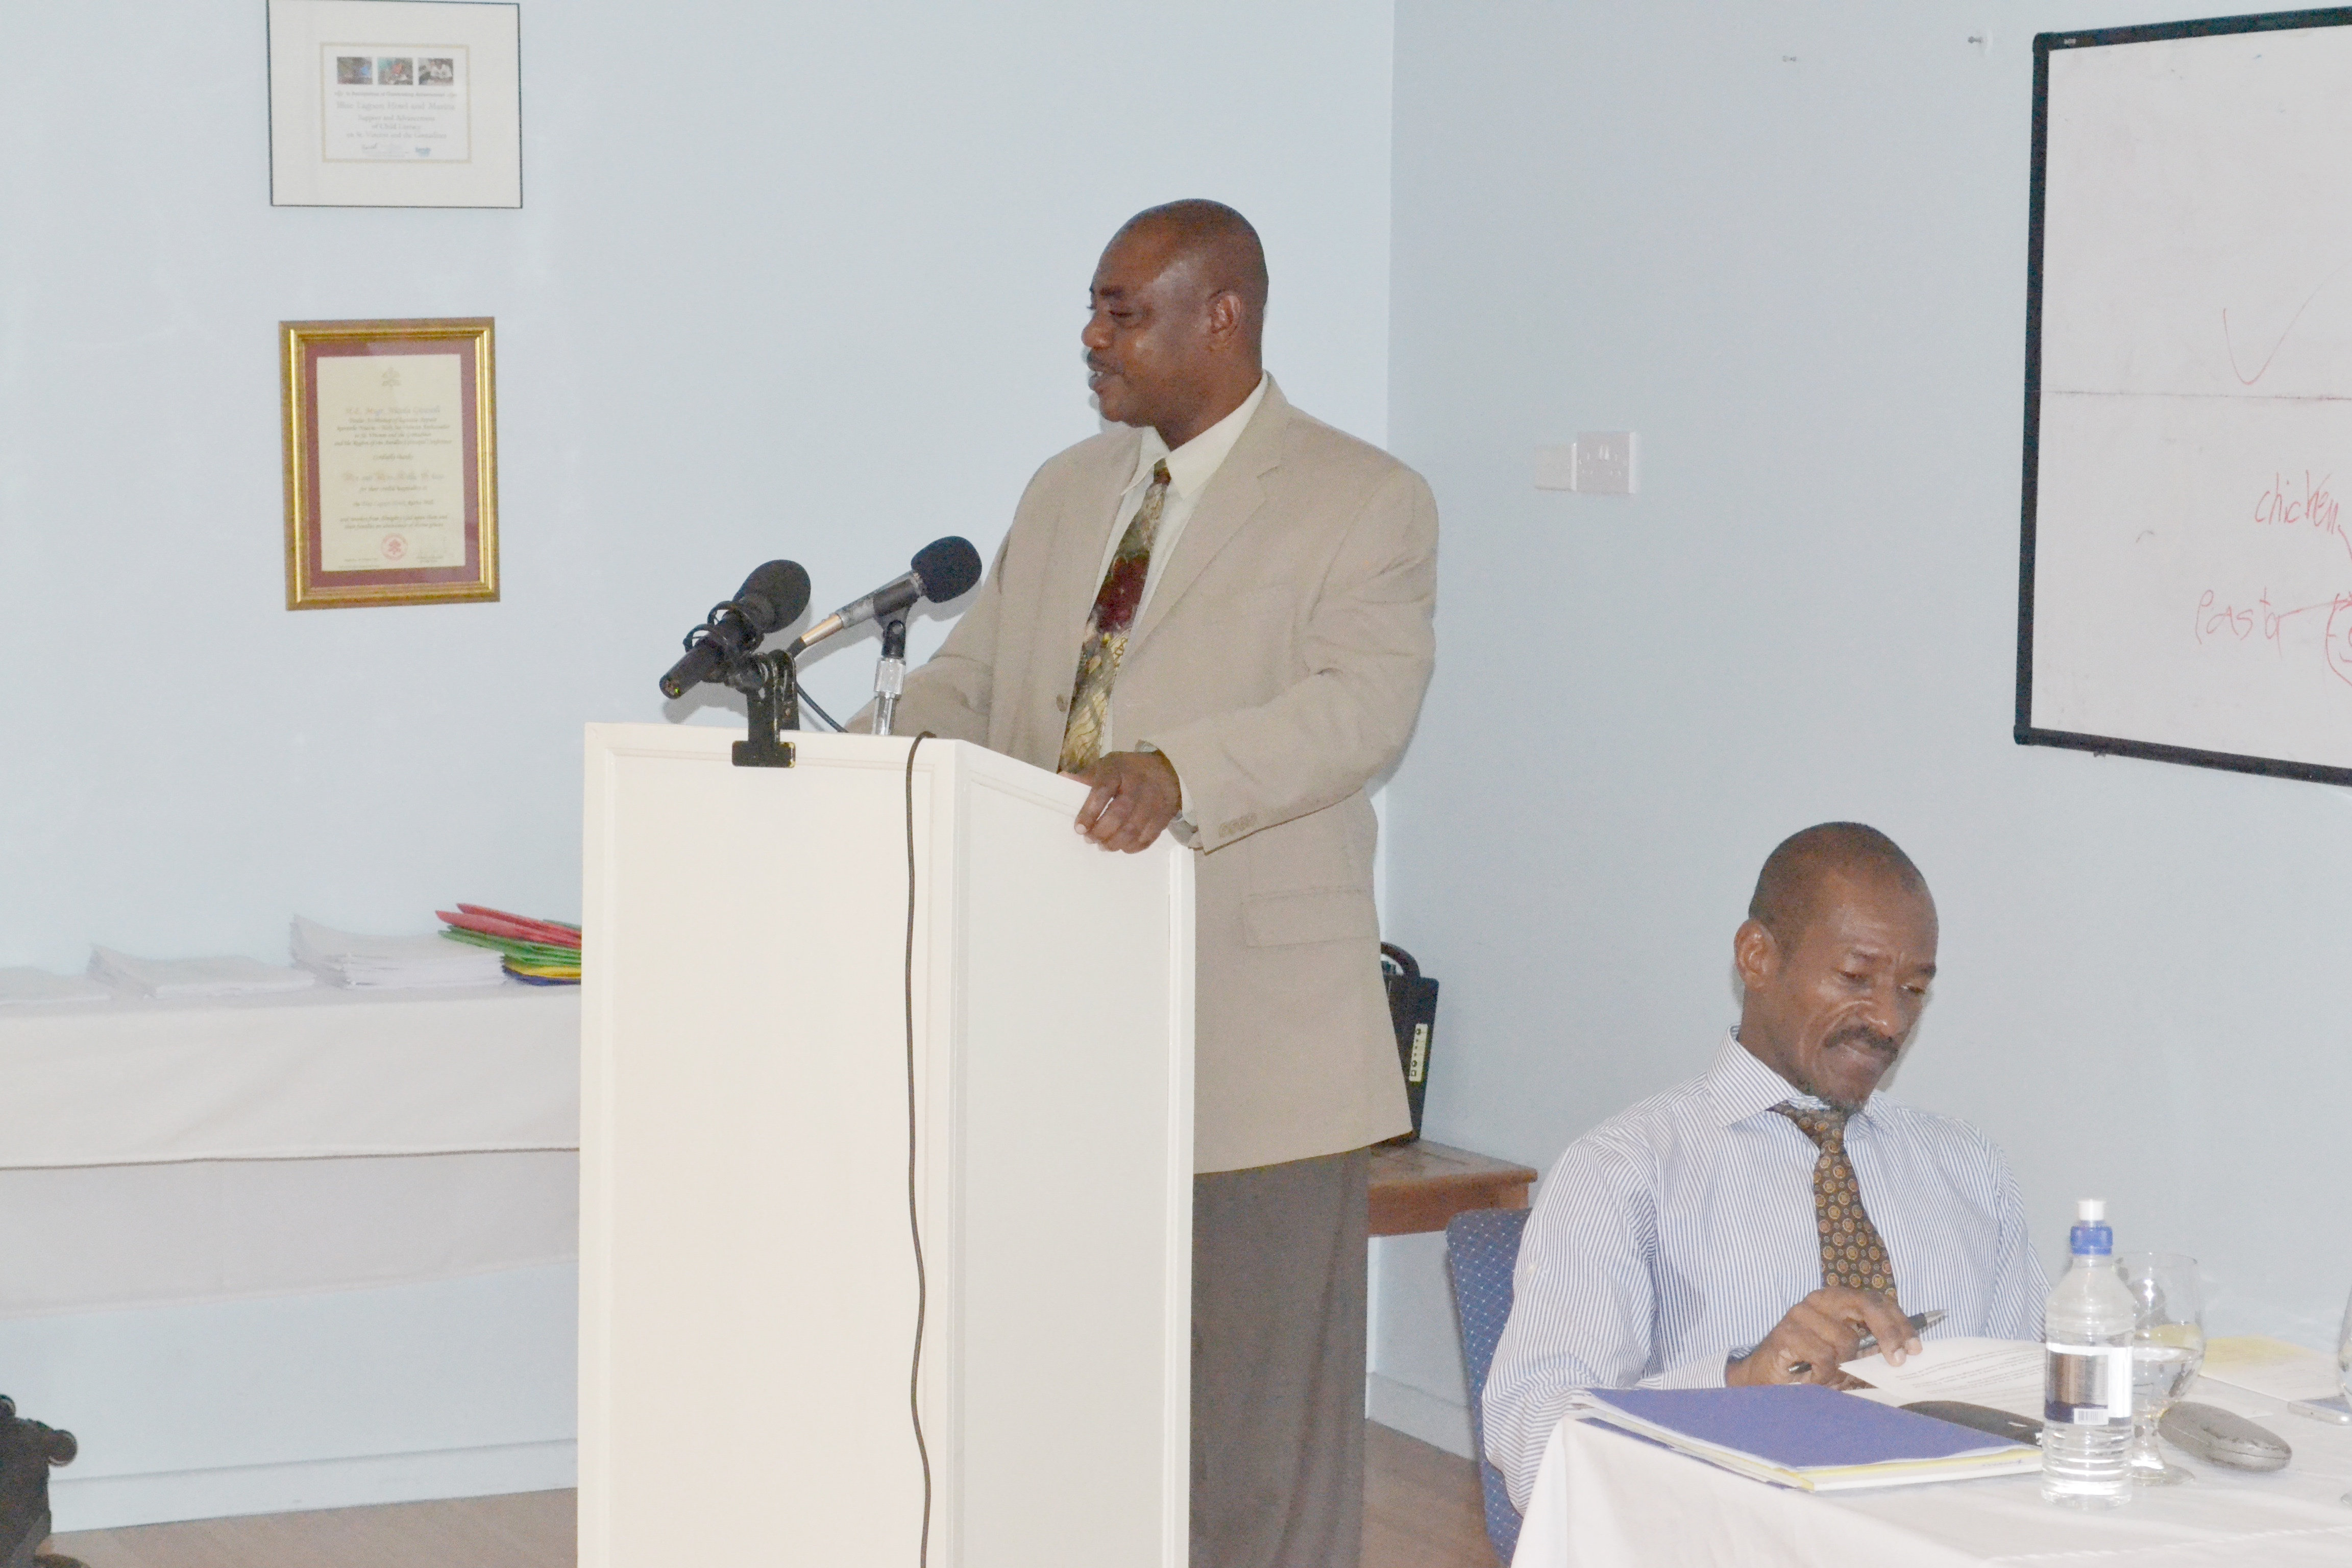 The Hon. Frederick Stephenson, Minister of National Mobilisation, Social Development, Gender and Youth Affairs, standing at podium, believes scientifically assessing community willingness to engage is key to developing successful climate resilience programmes.